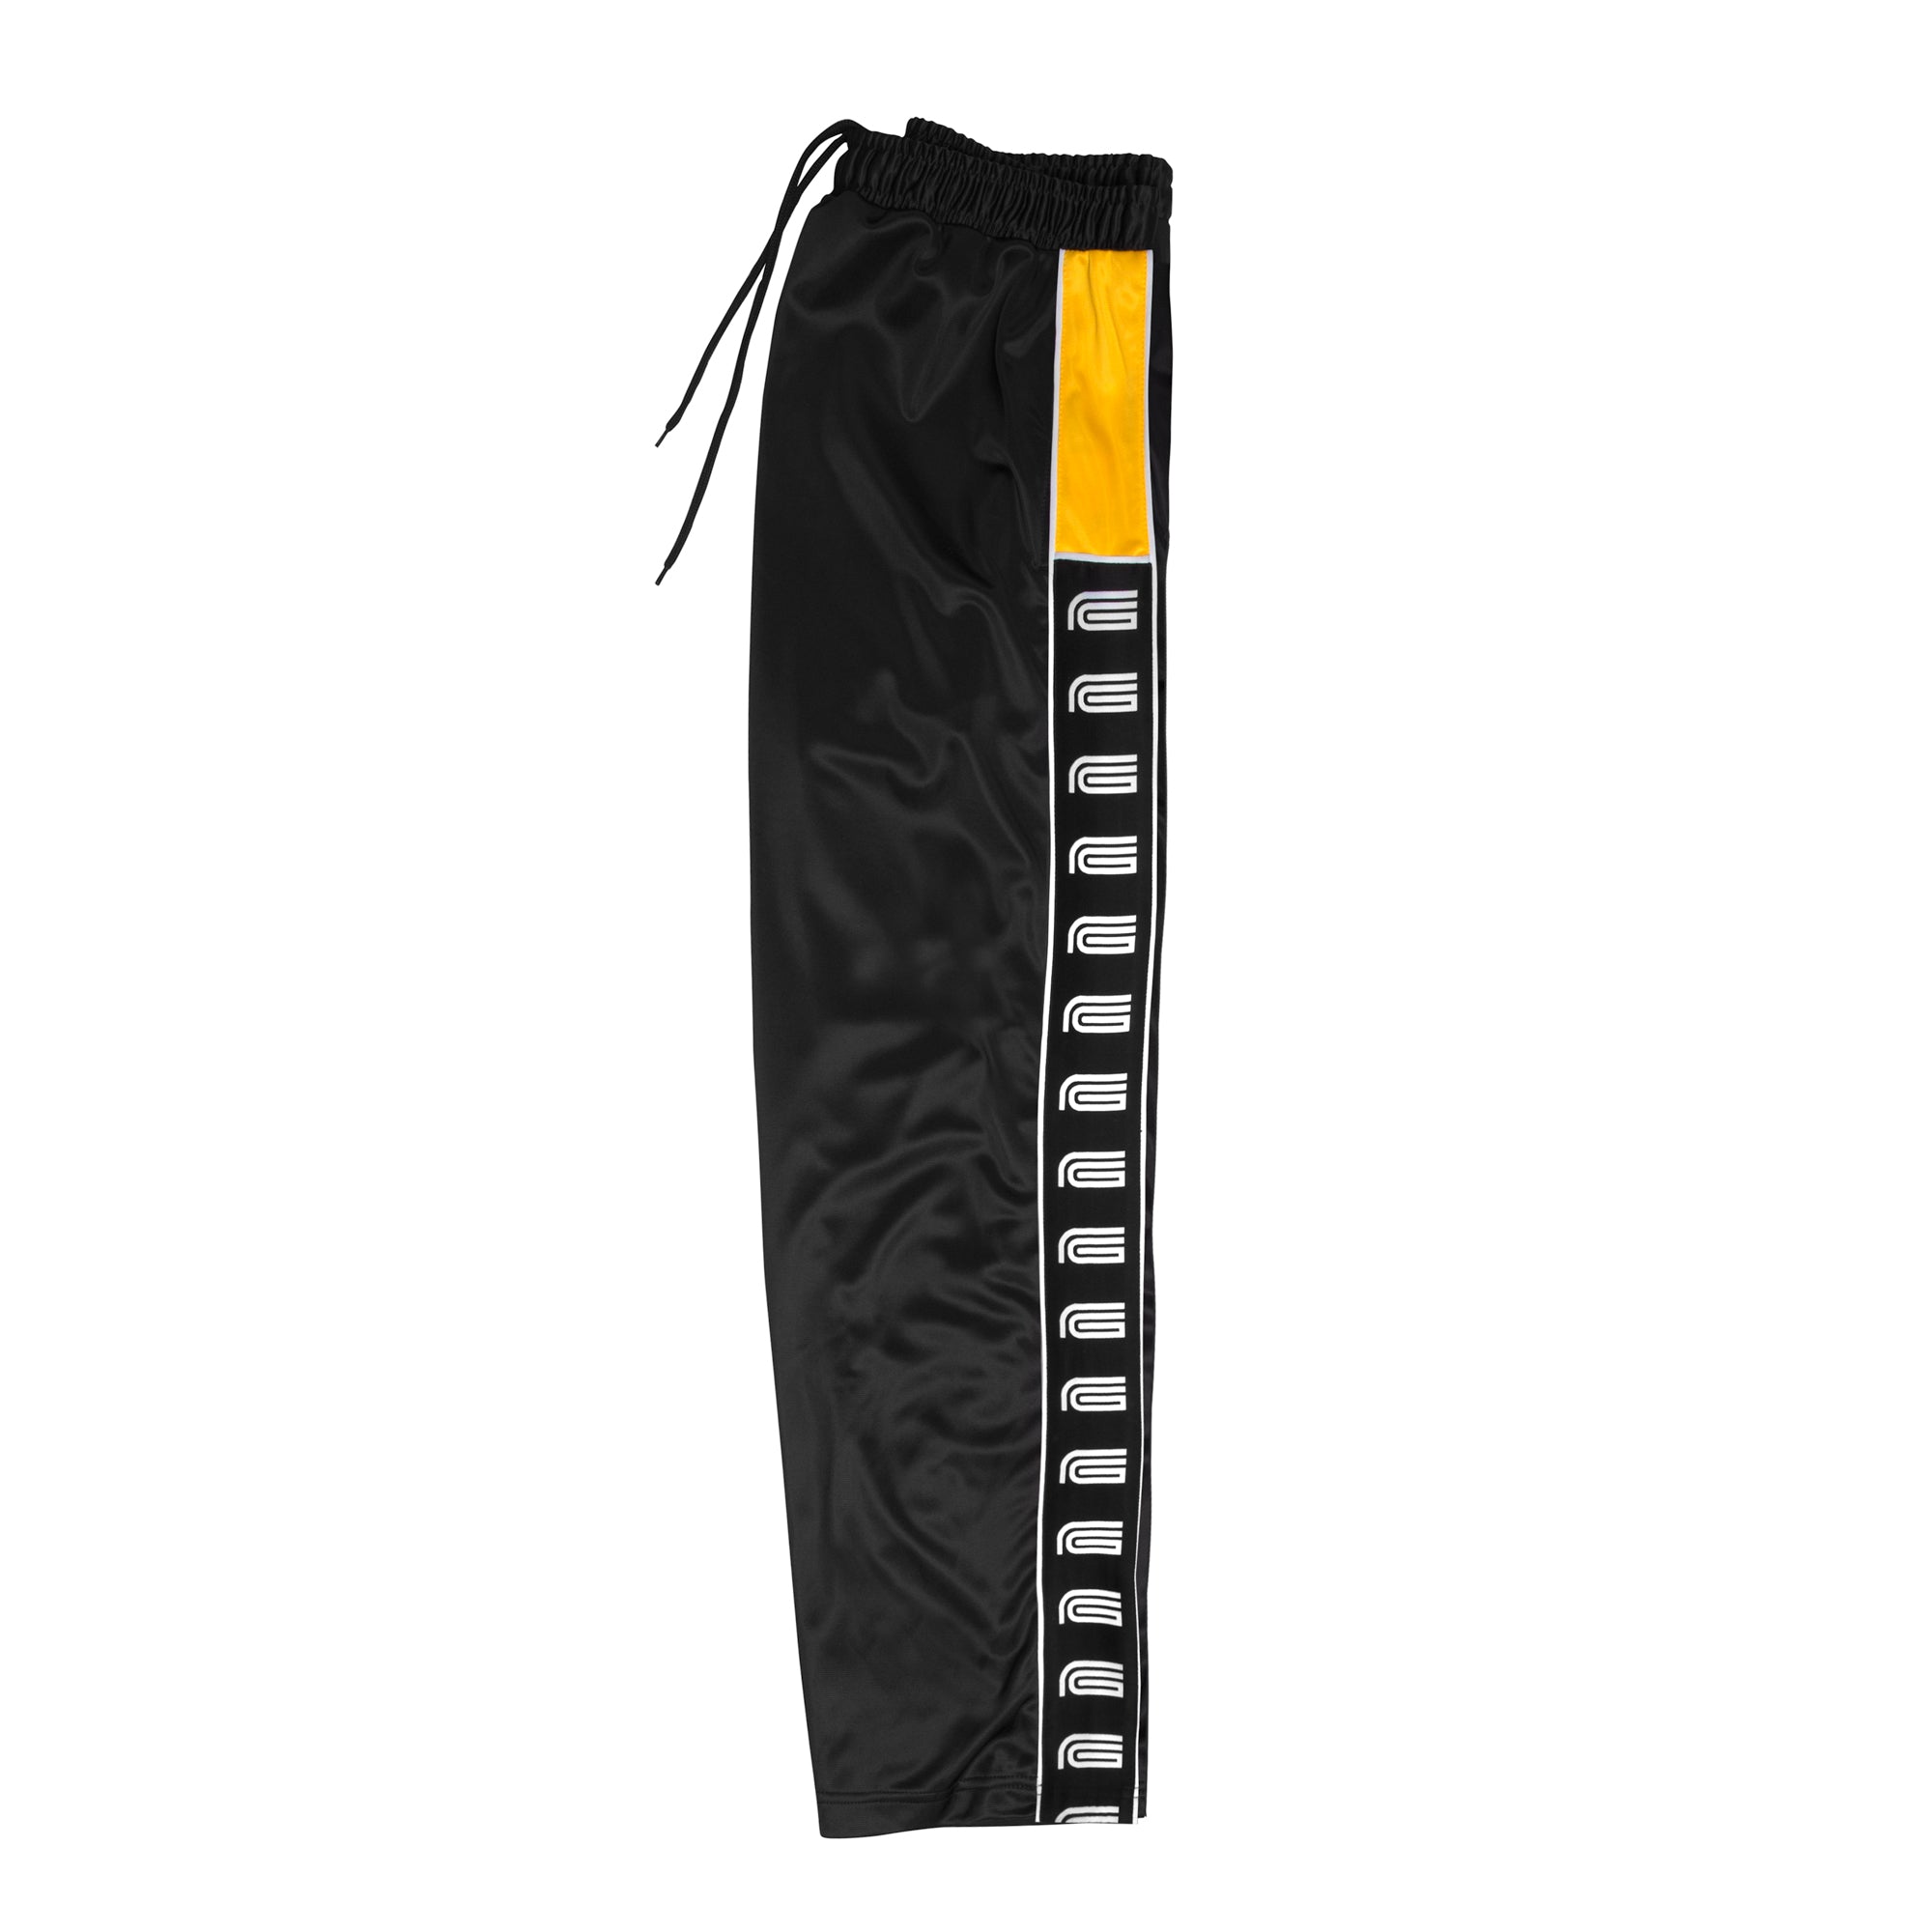 Fool’s Gold “808” Tracksuit - Pants